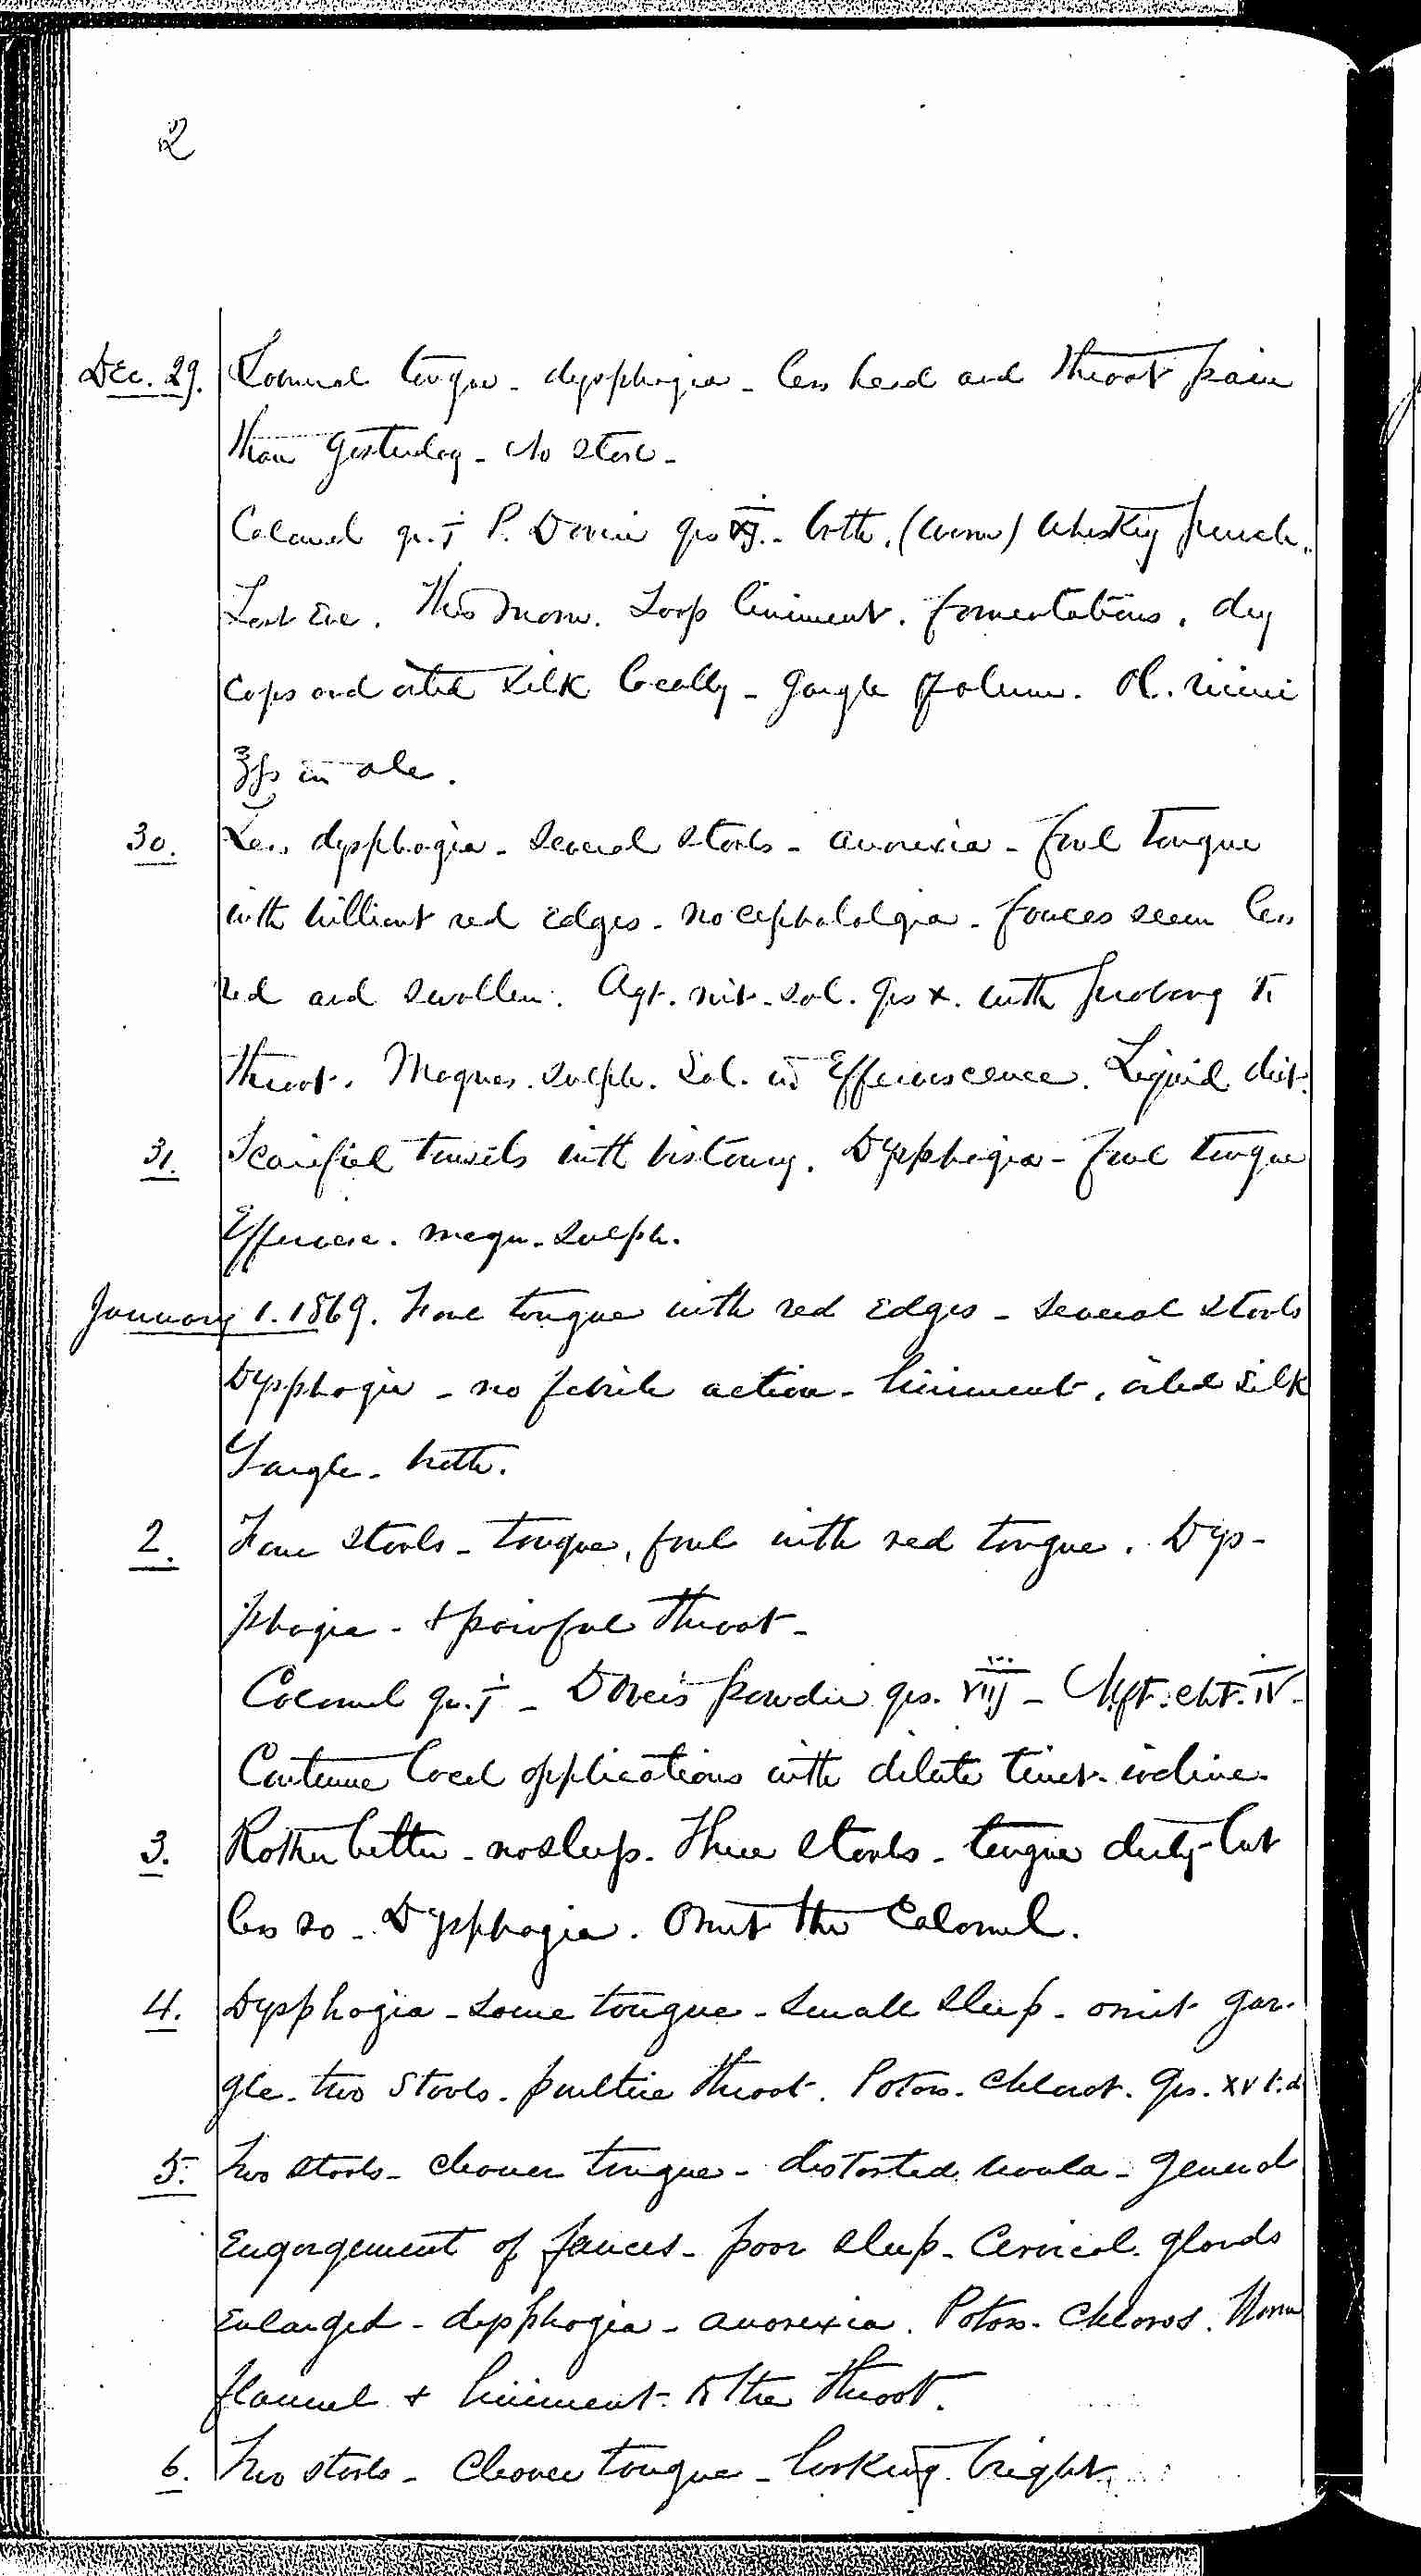 Entry for Edward Bell (page 2 of 5) in the log Hospital Tickets and Case Papers - Naval Hospital - Washington, D.C. - 1868-69